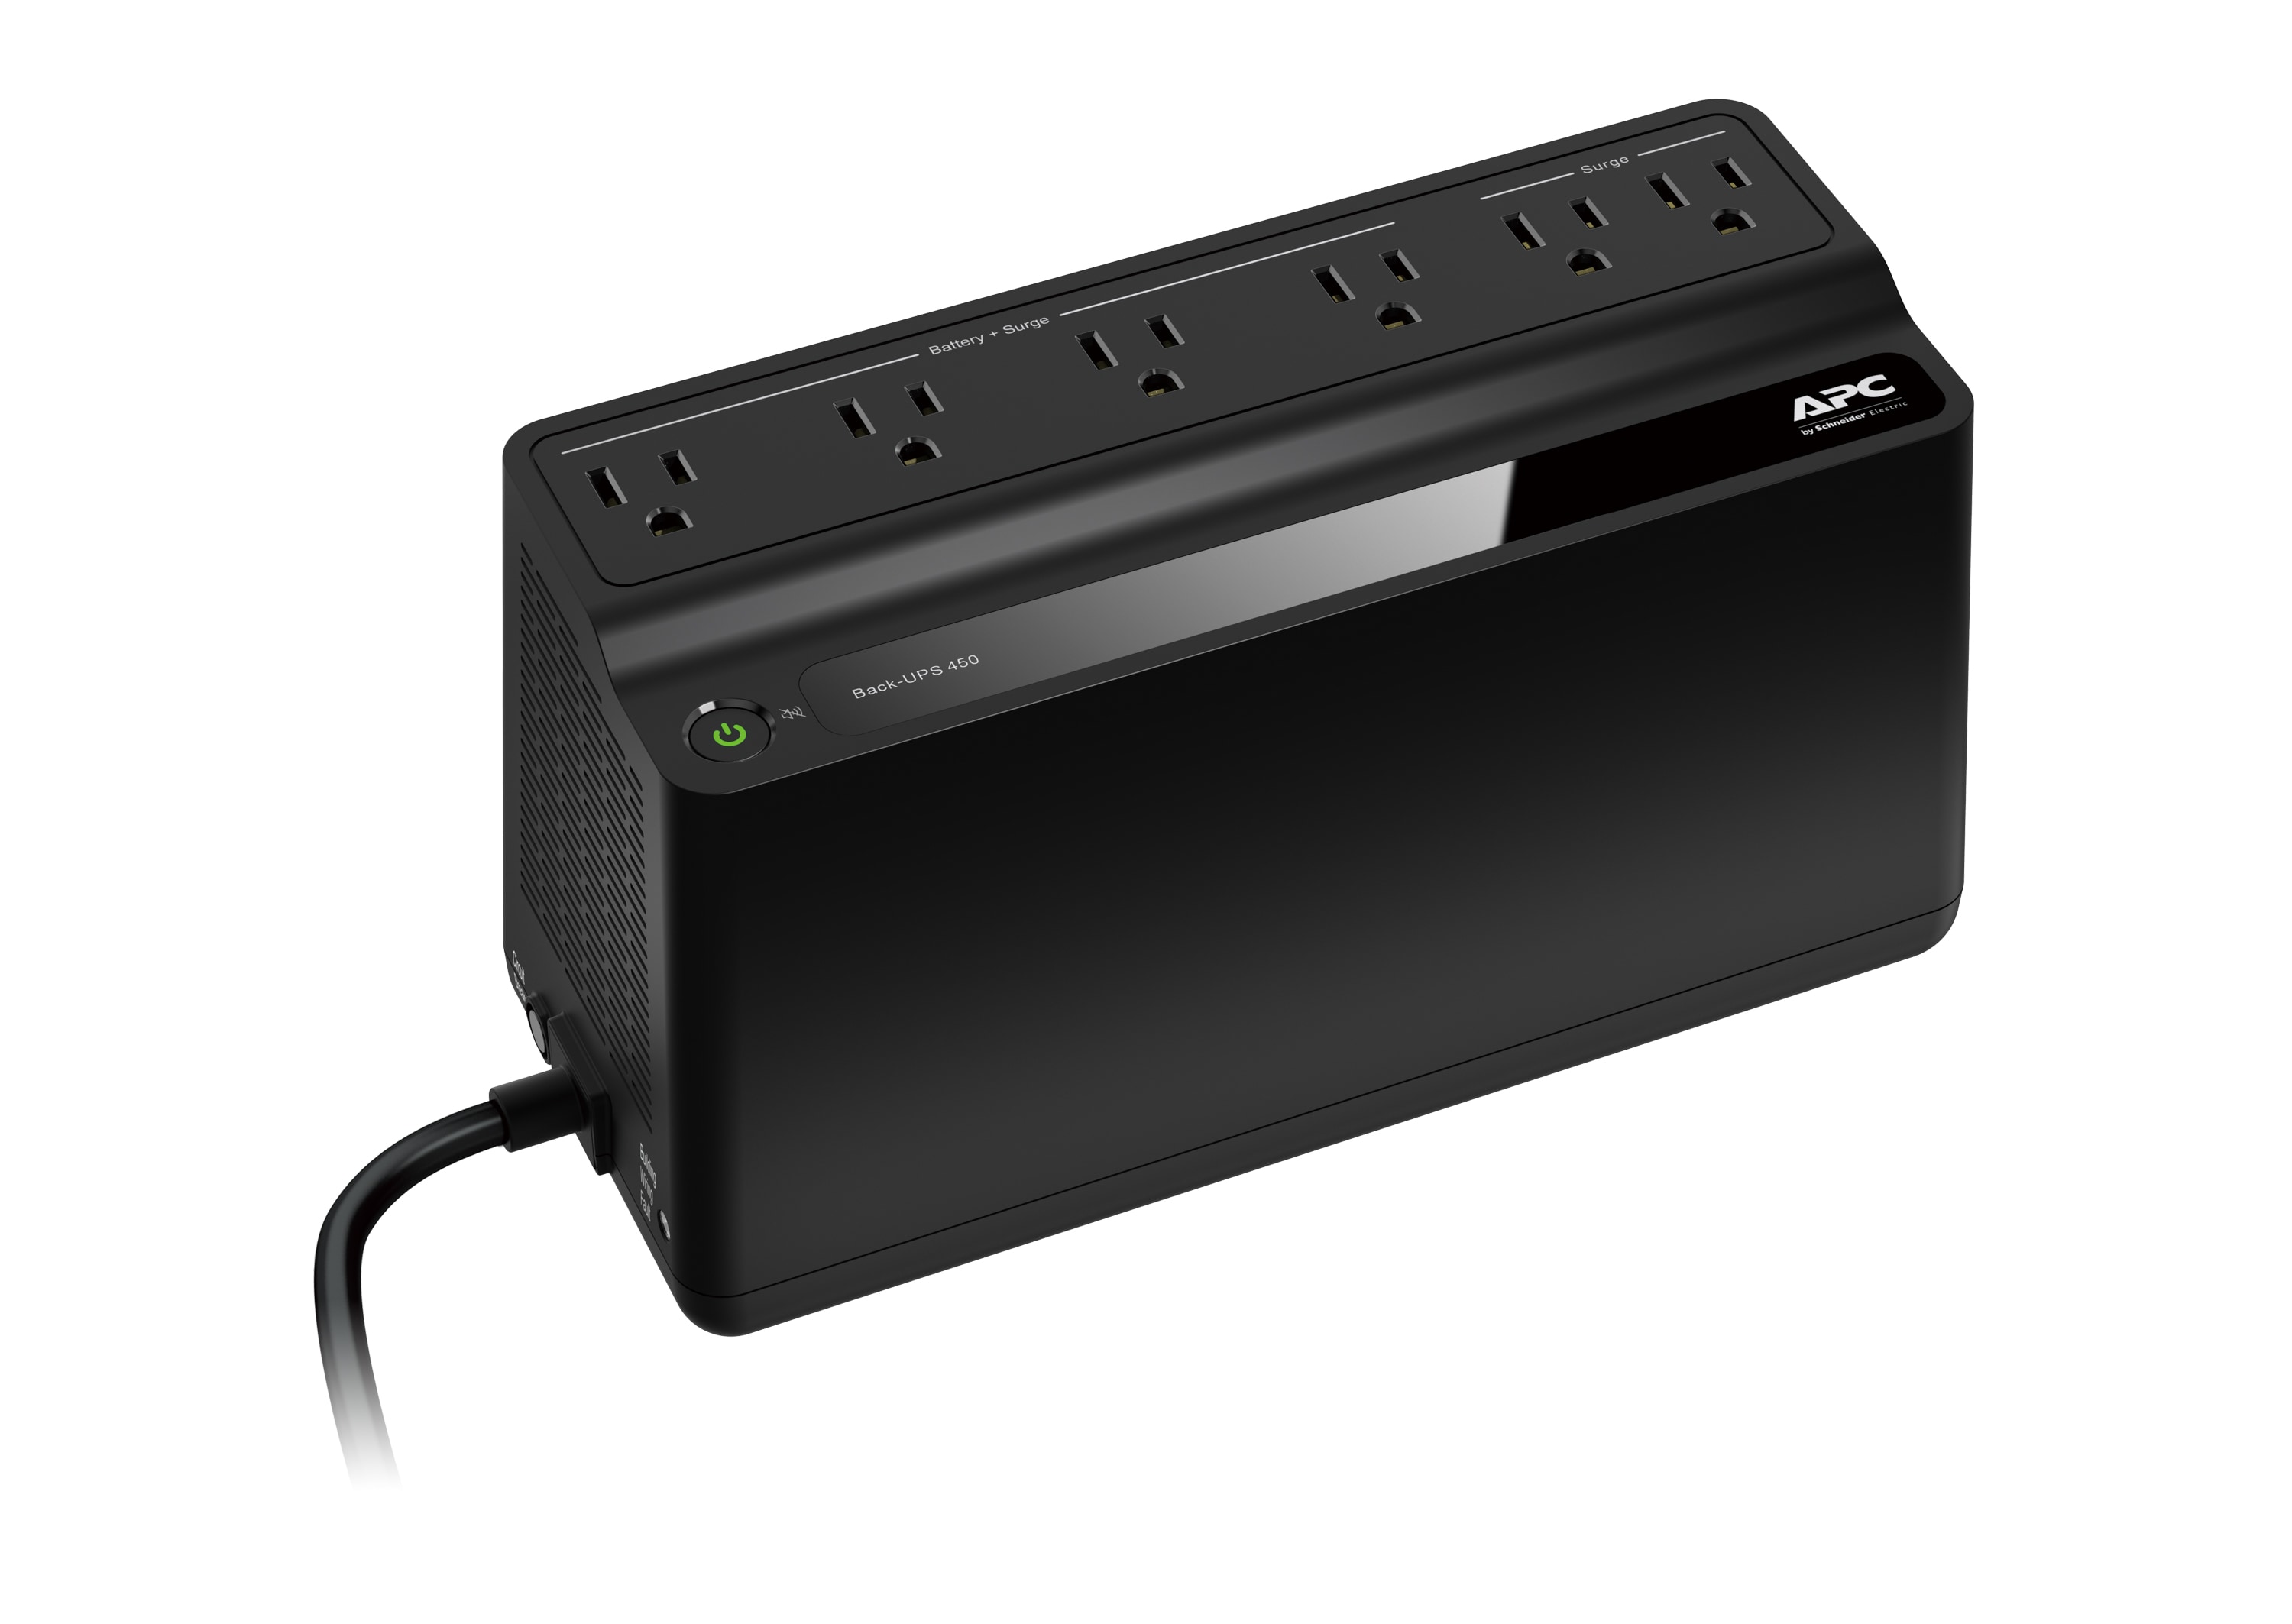 APC UPS: High-Quality Battery Backup Solution for Home Devices